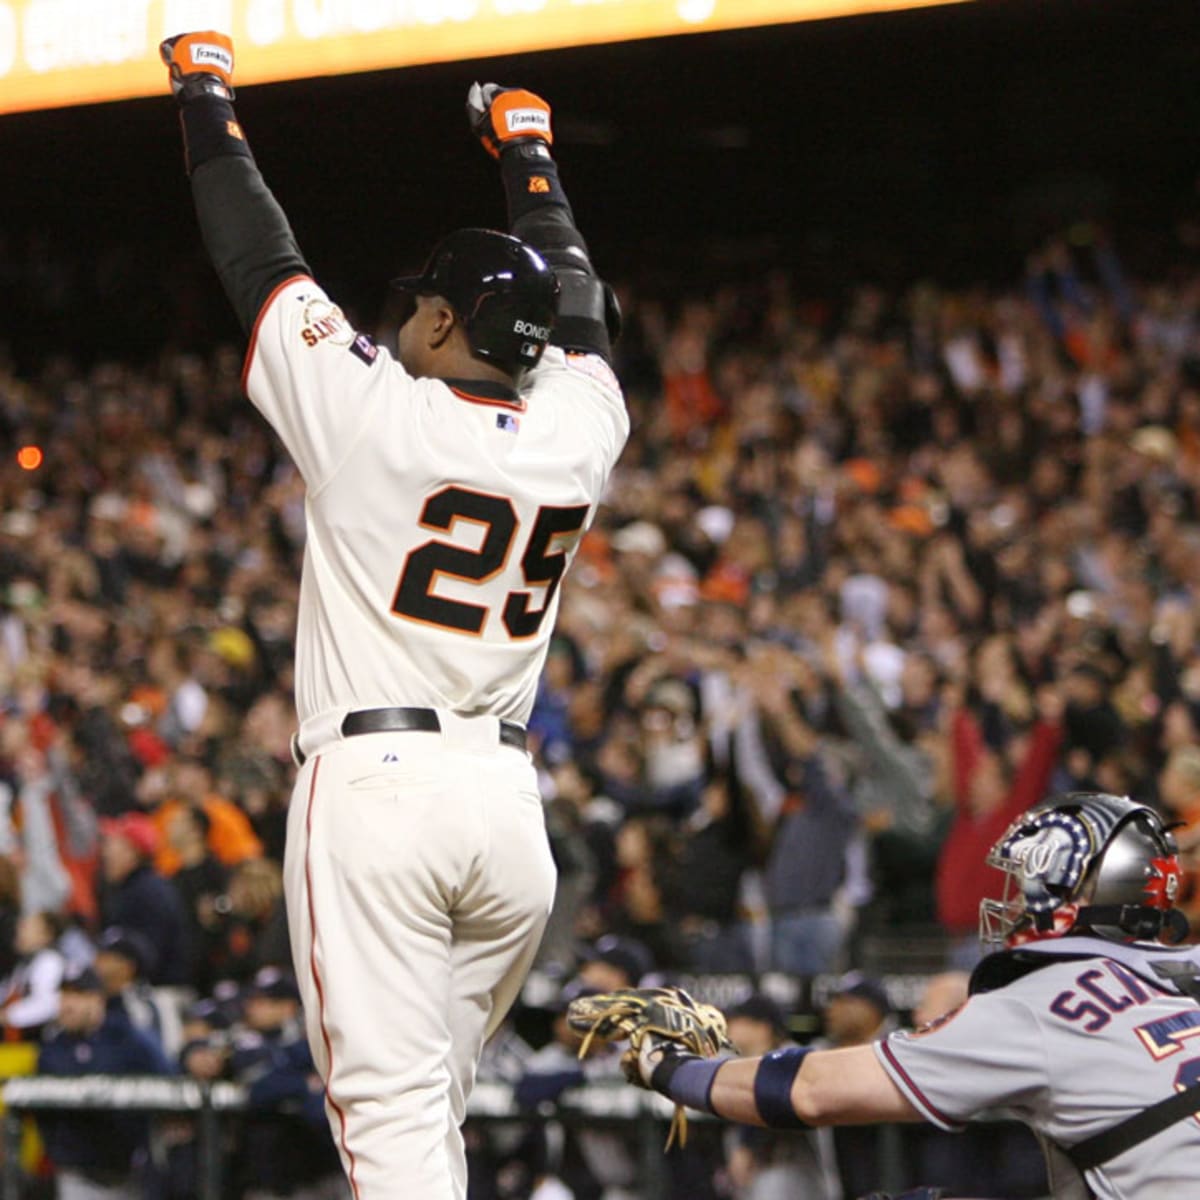 Barry Bonds' home run record is one we should all celebrate